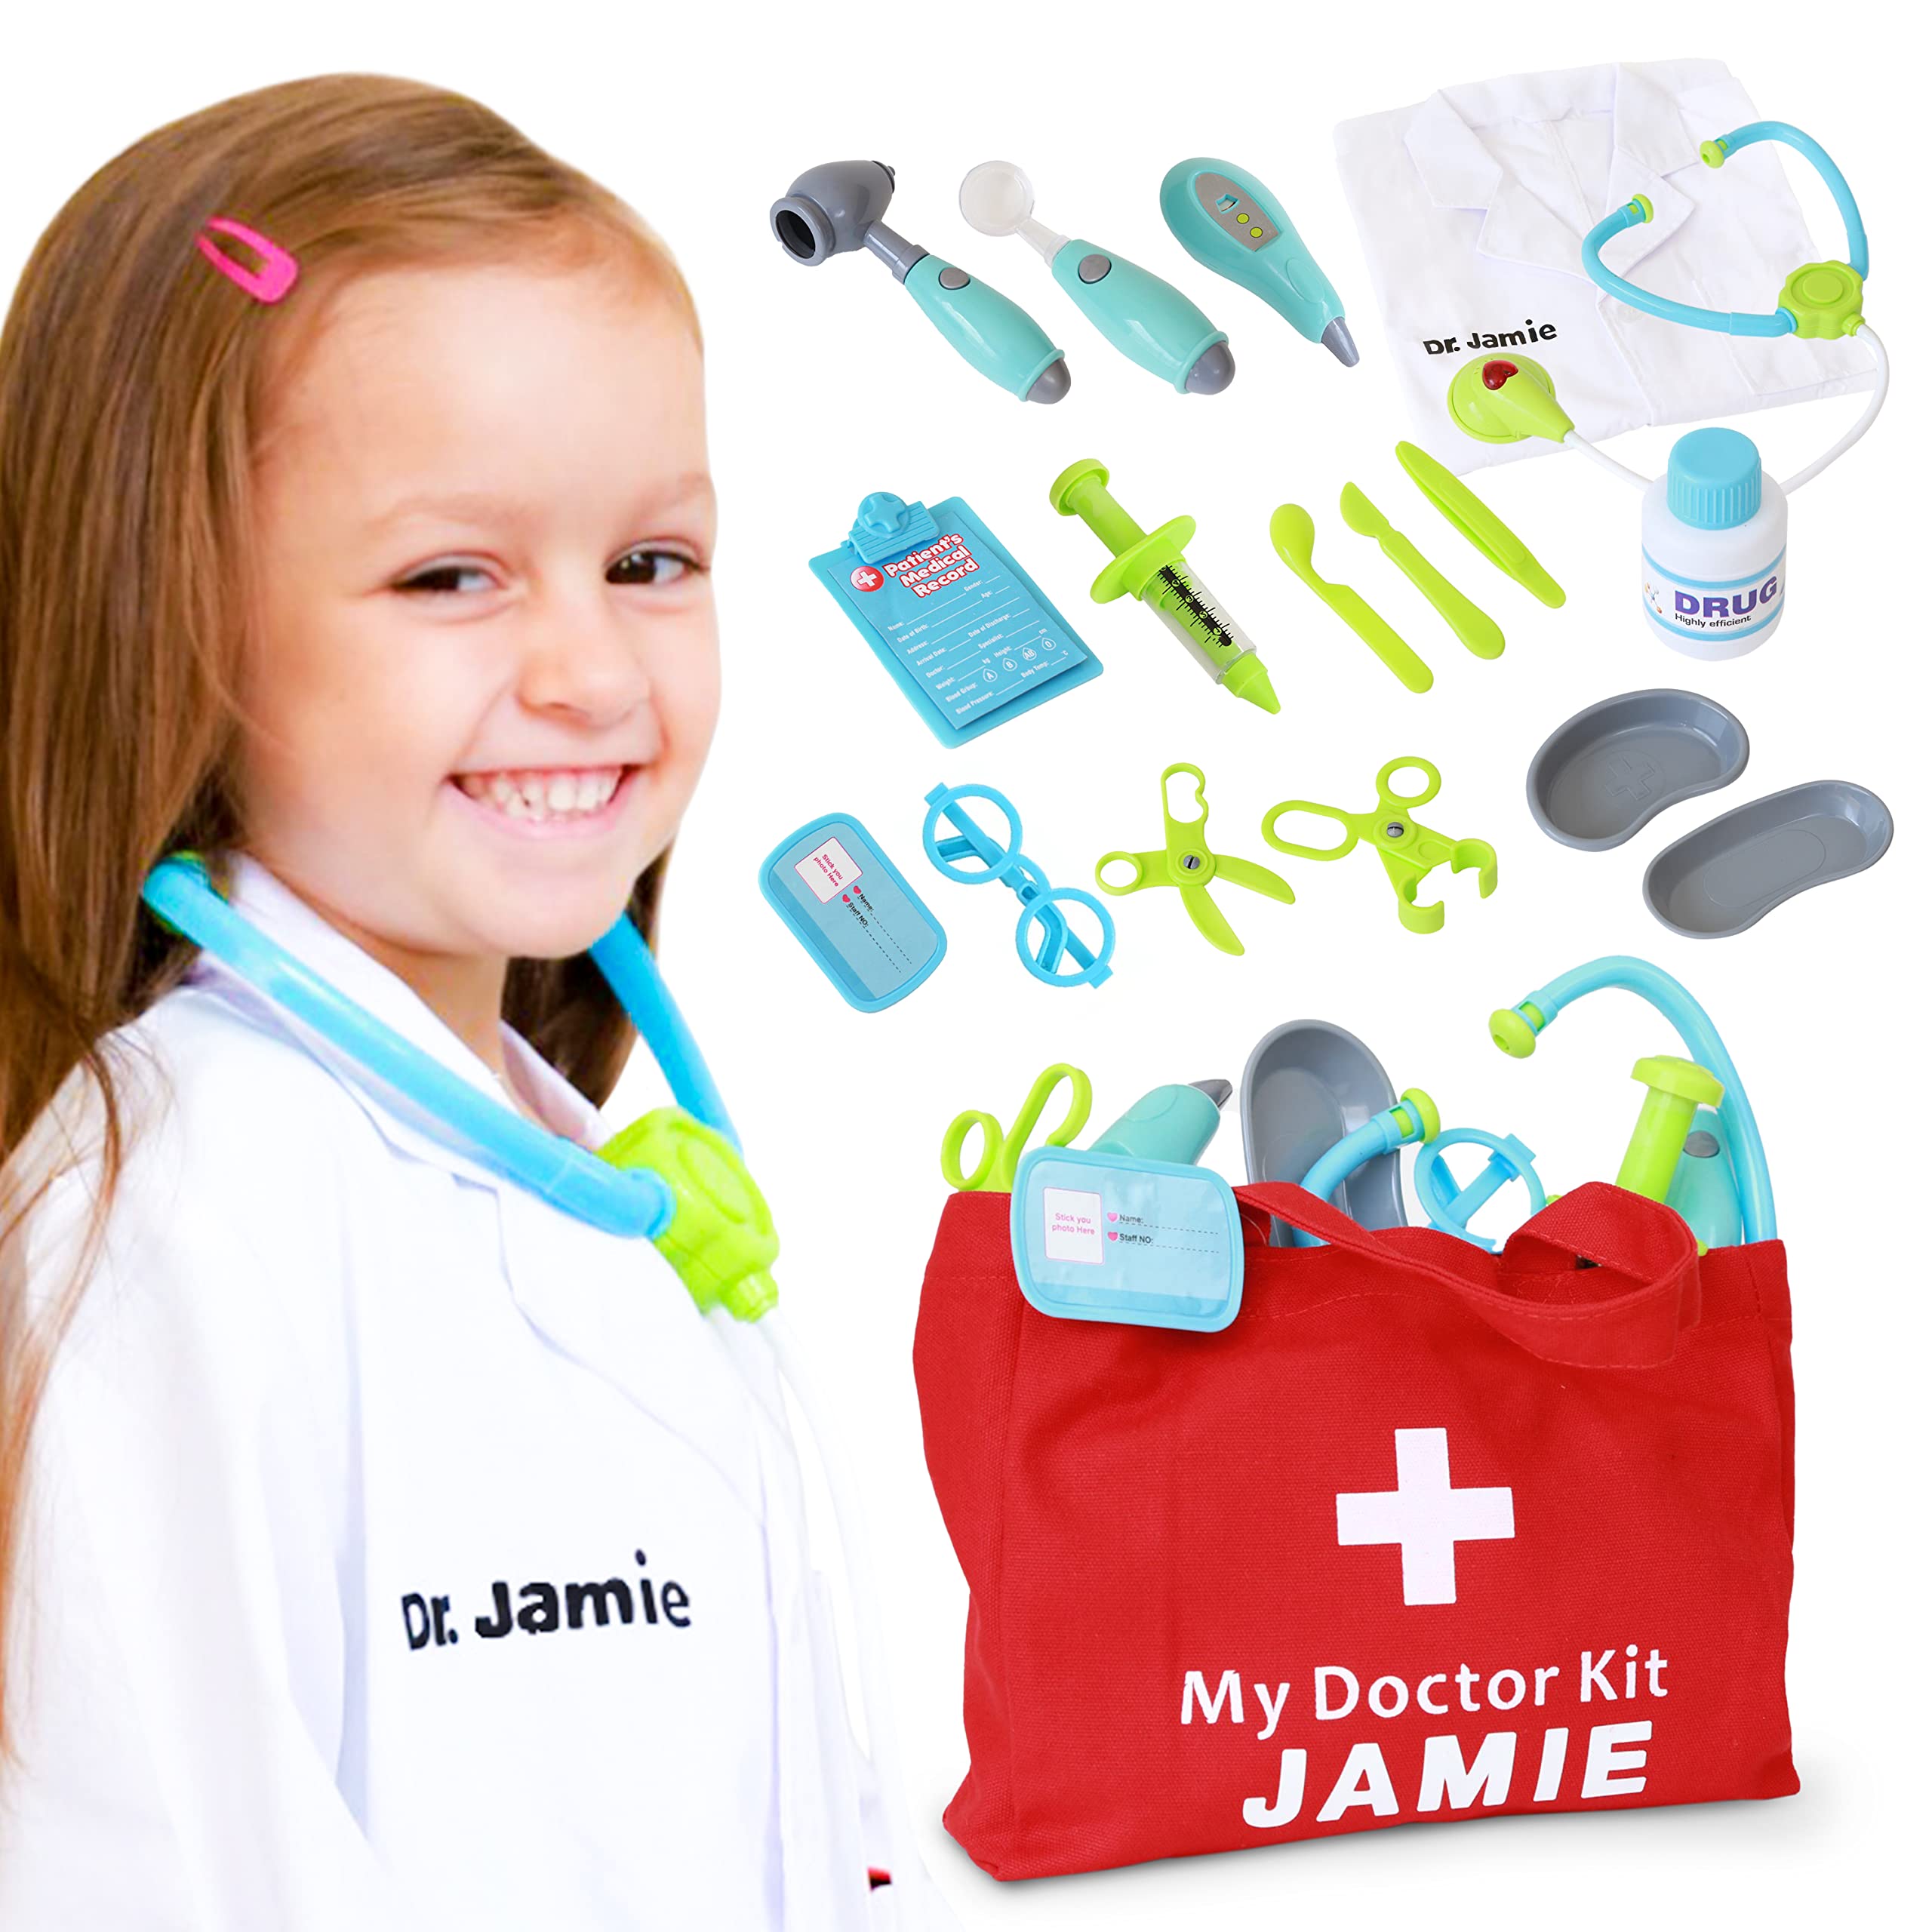 Dreamy Accessories Personalized Doctor Kit for Kids - Realistic Doctor Playset for Kids - Doctor Kit for Toddlers 3-5 Years Old